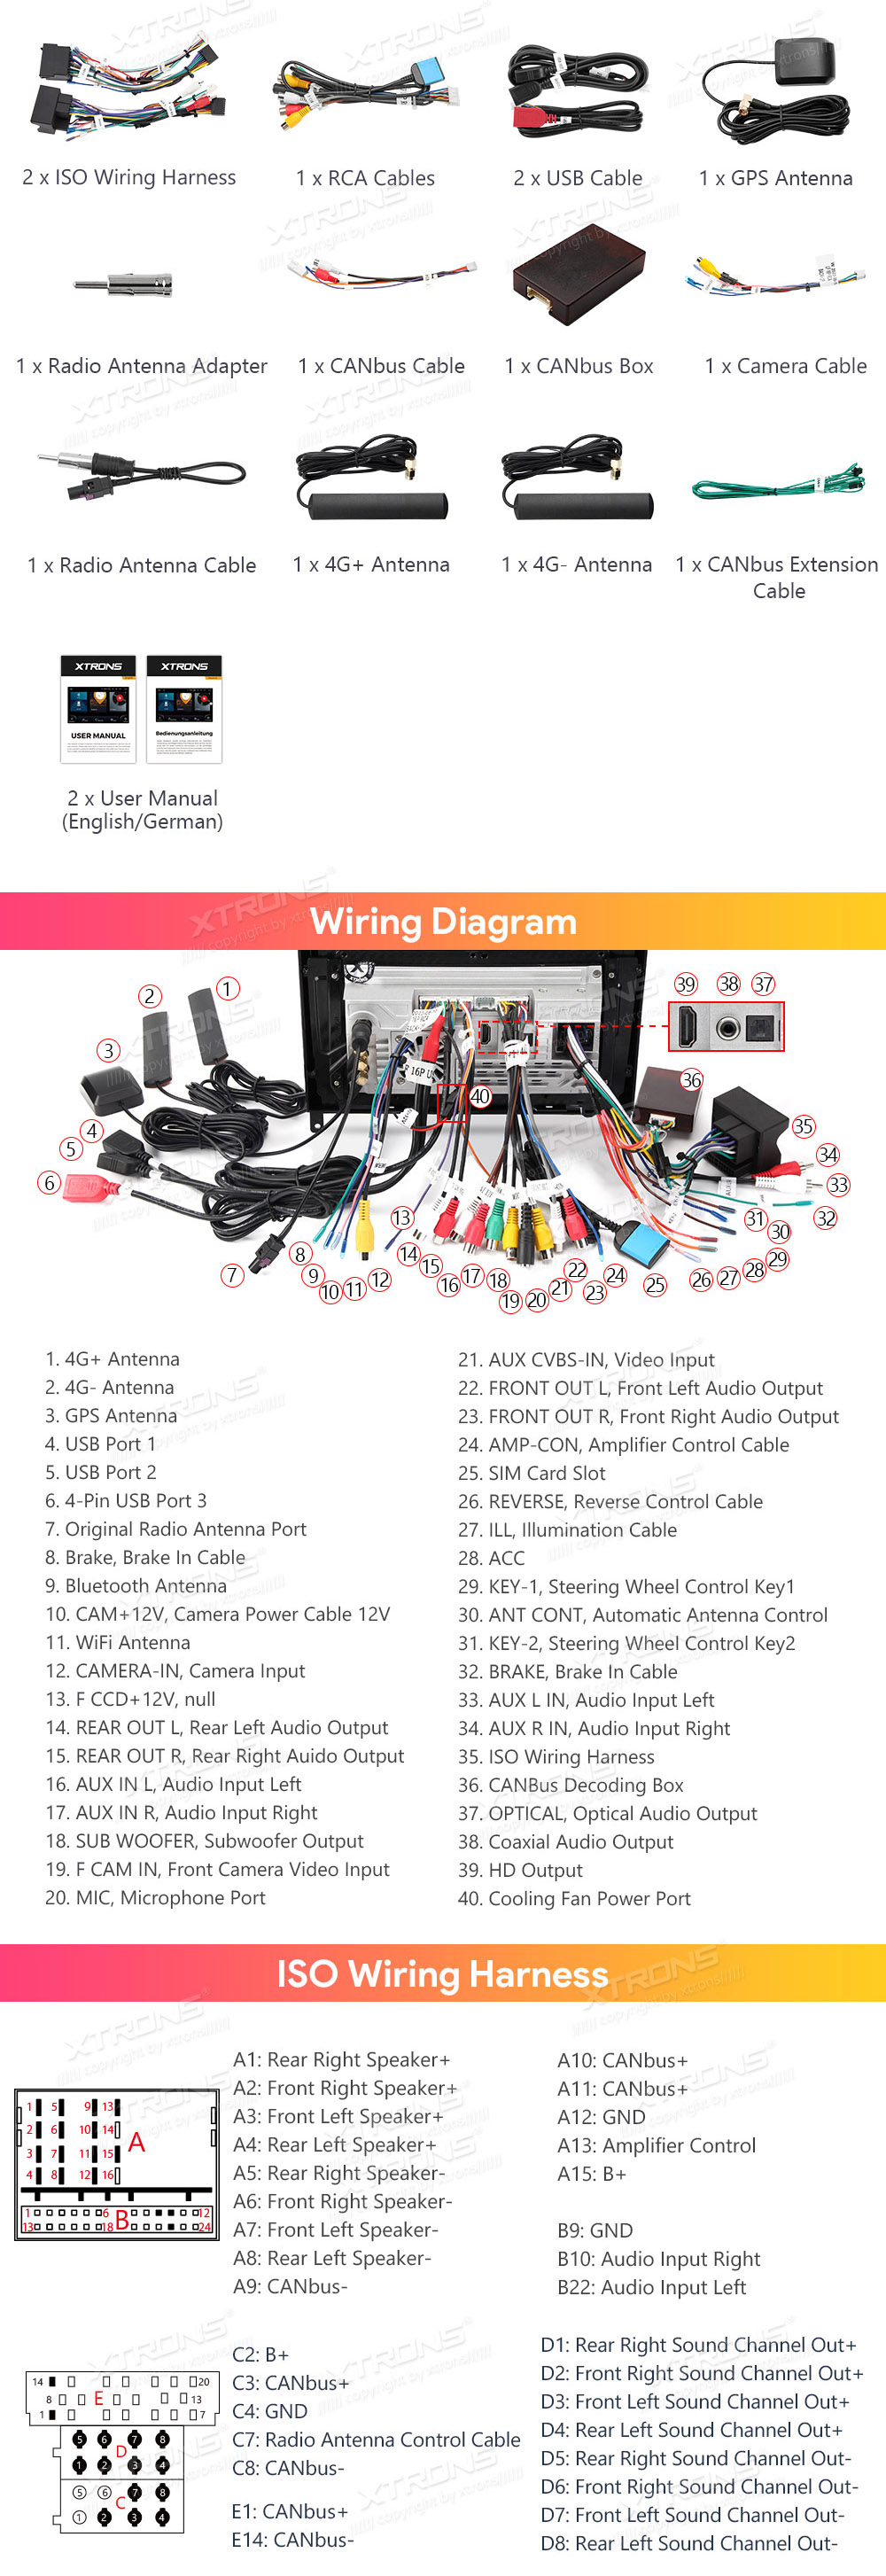 XTRONS IQP92M245P XTRONS IQP92M245P Wiring Diagram and size